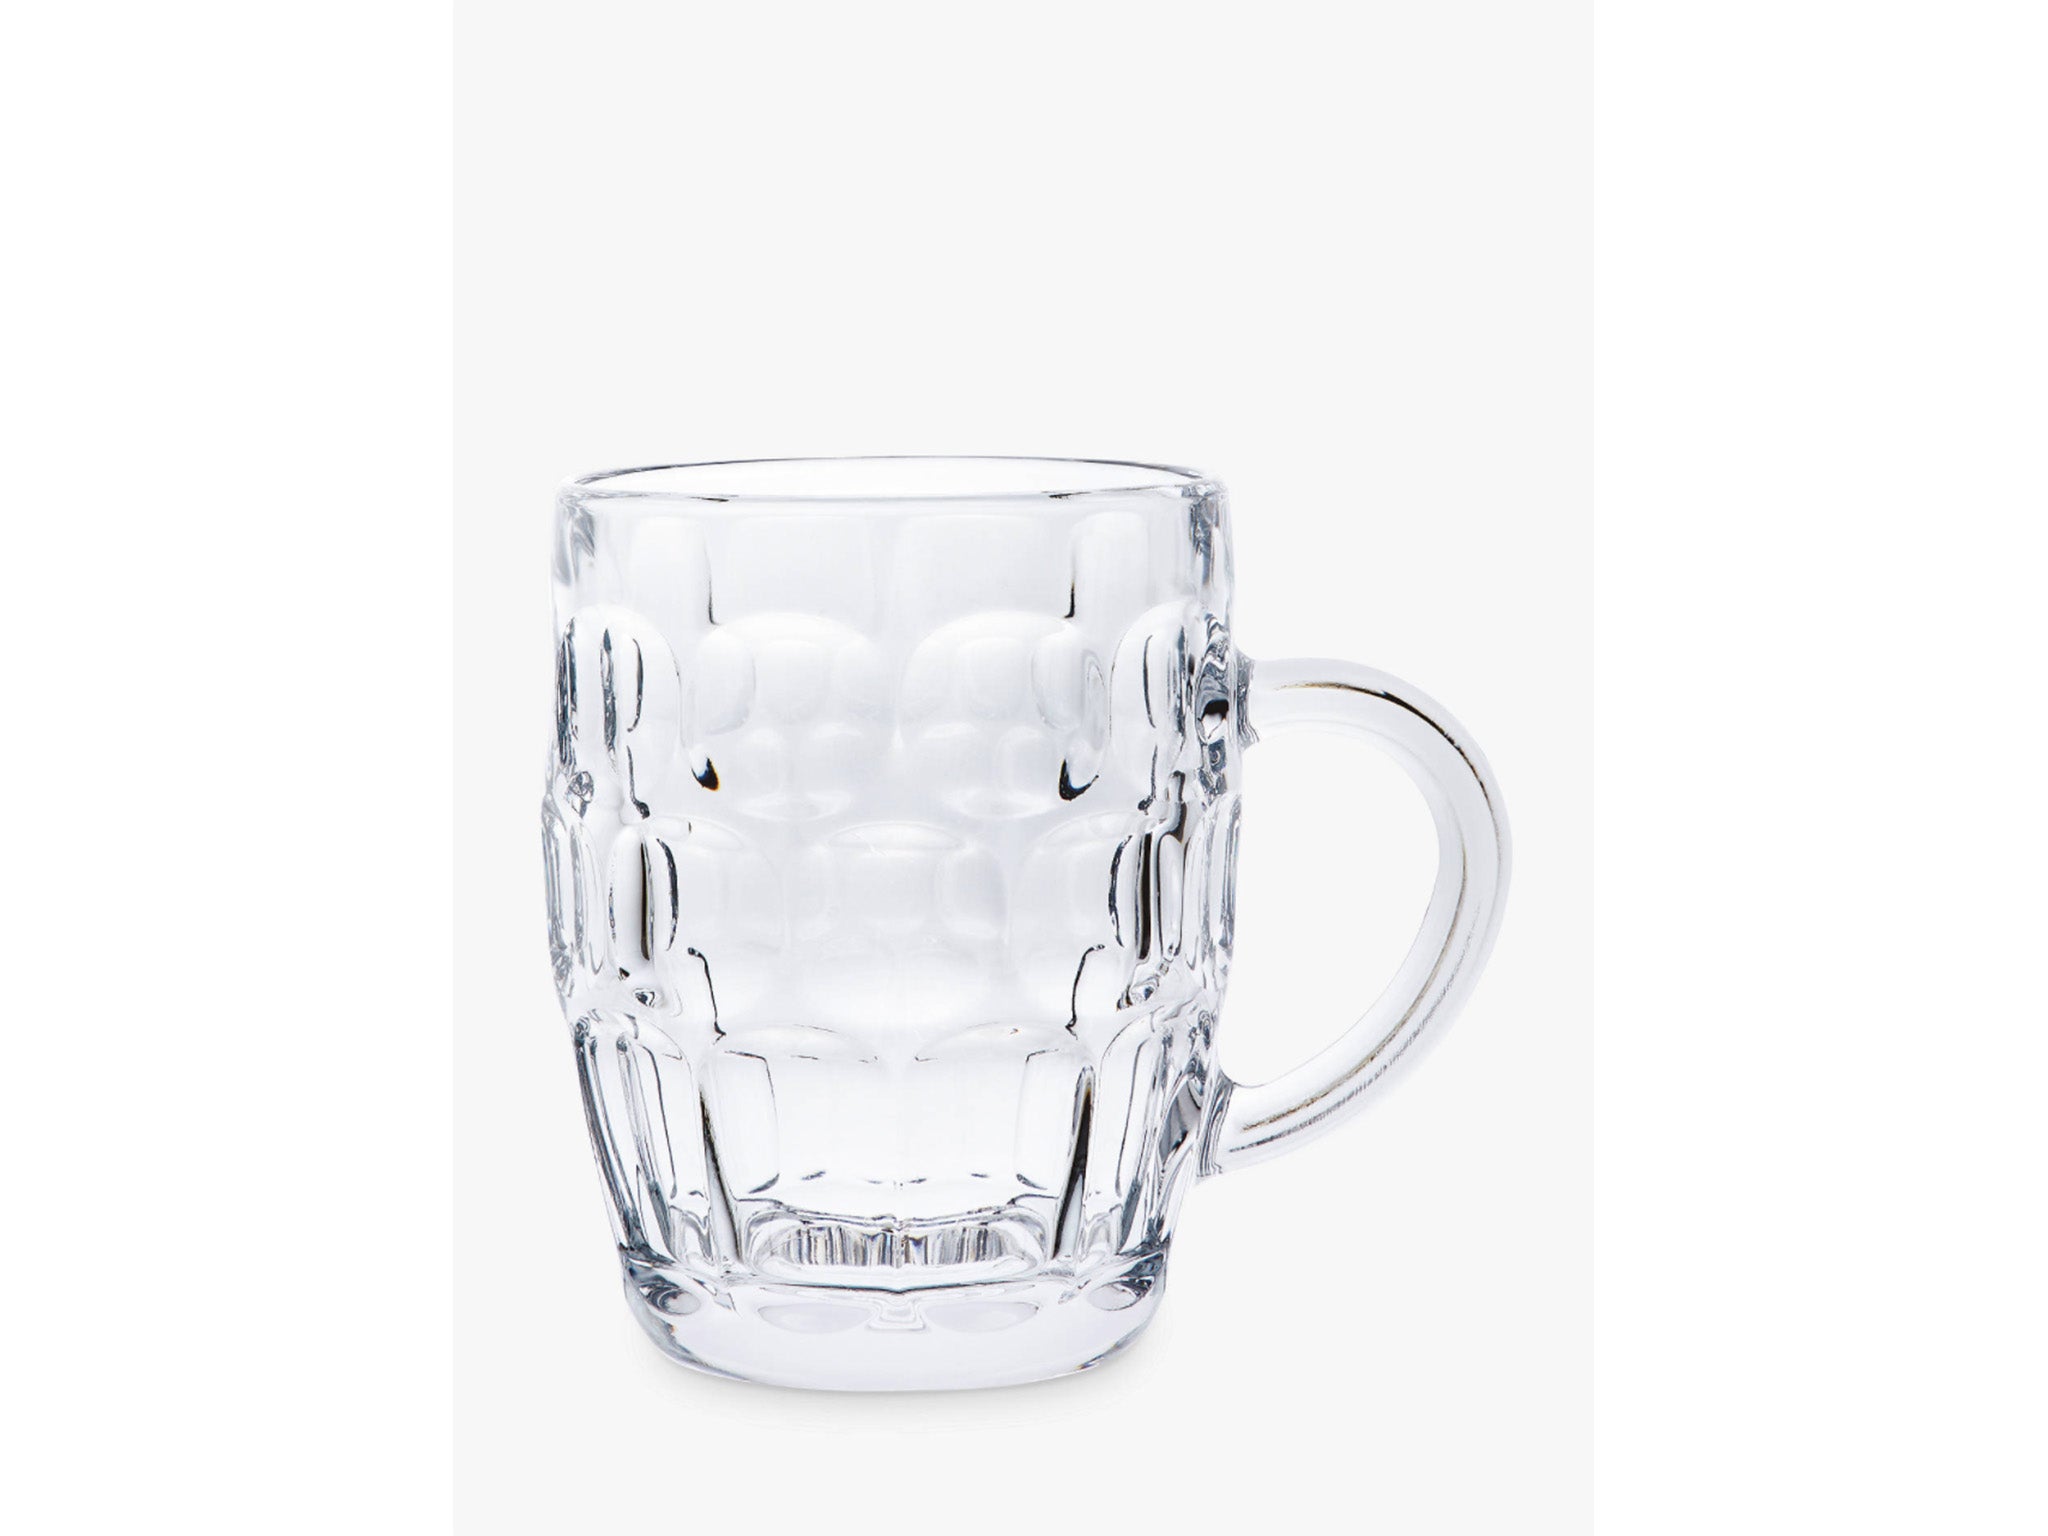 Sip on your German beers in style with this affordable stein glass